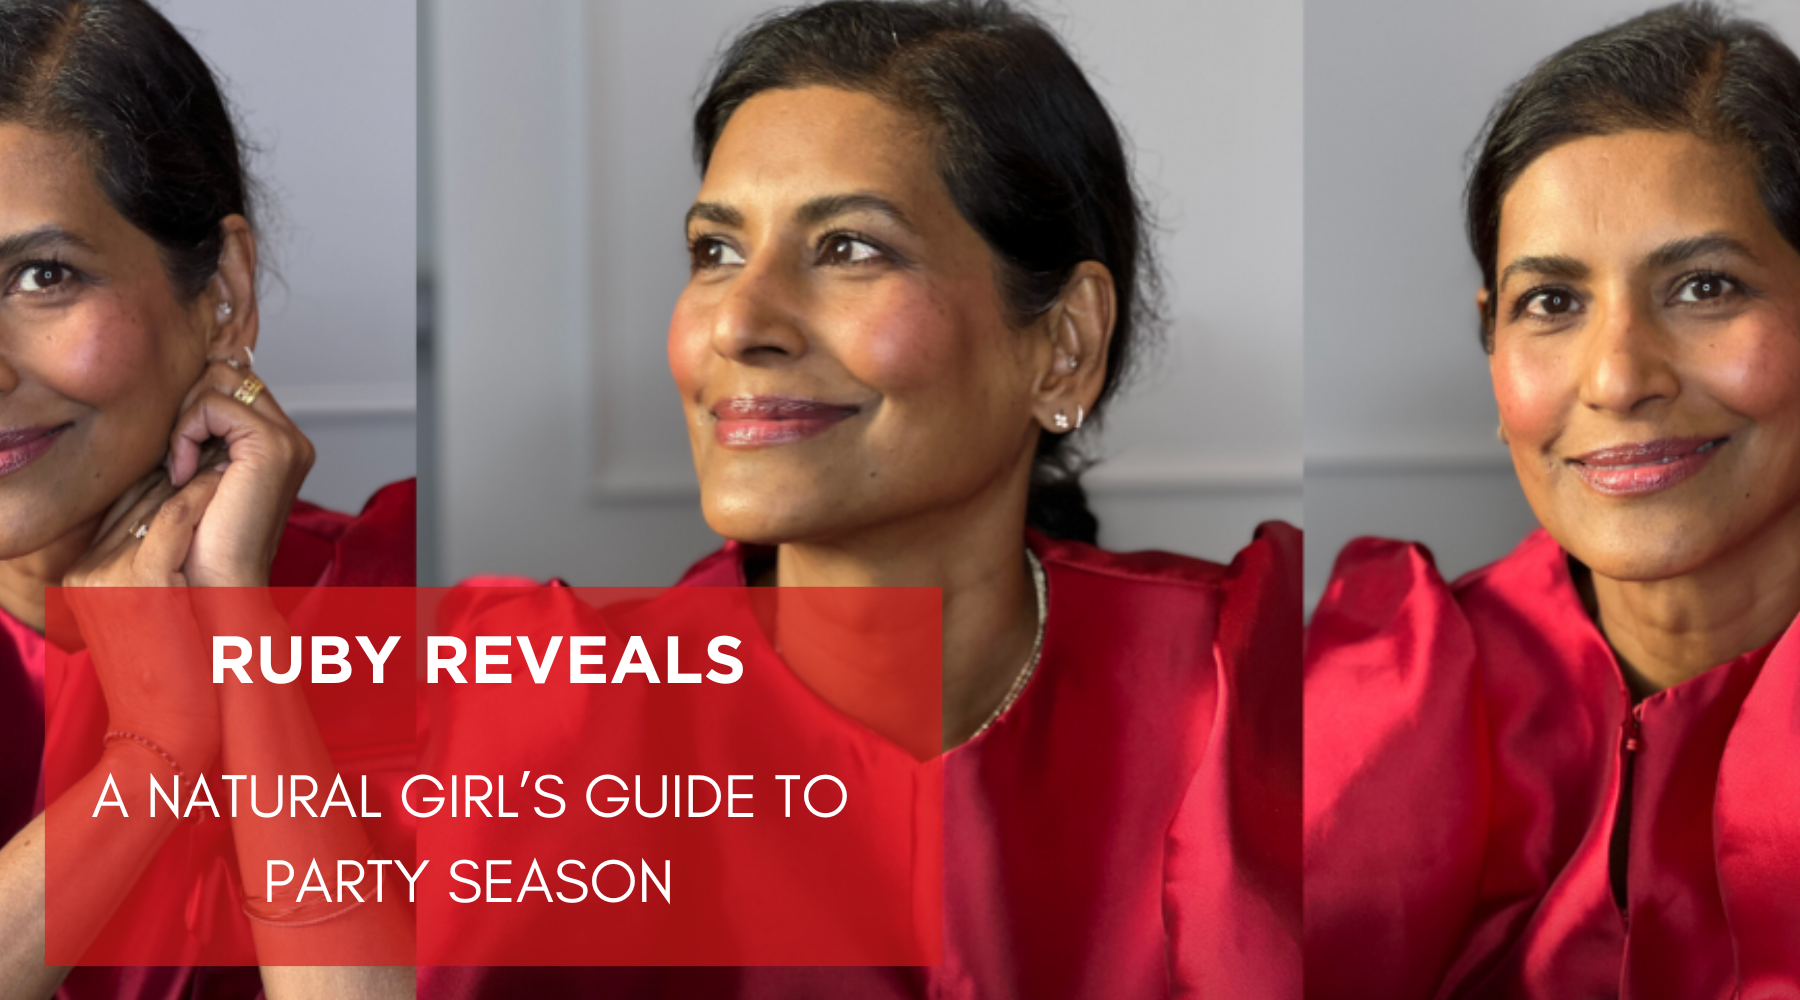 RUBY REVEALS: A NATURAL GIRL'S GUIDE FOR PARTY SEASON